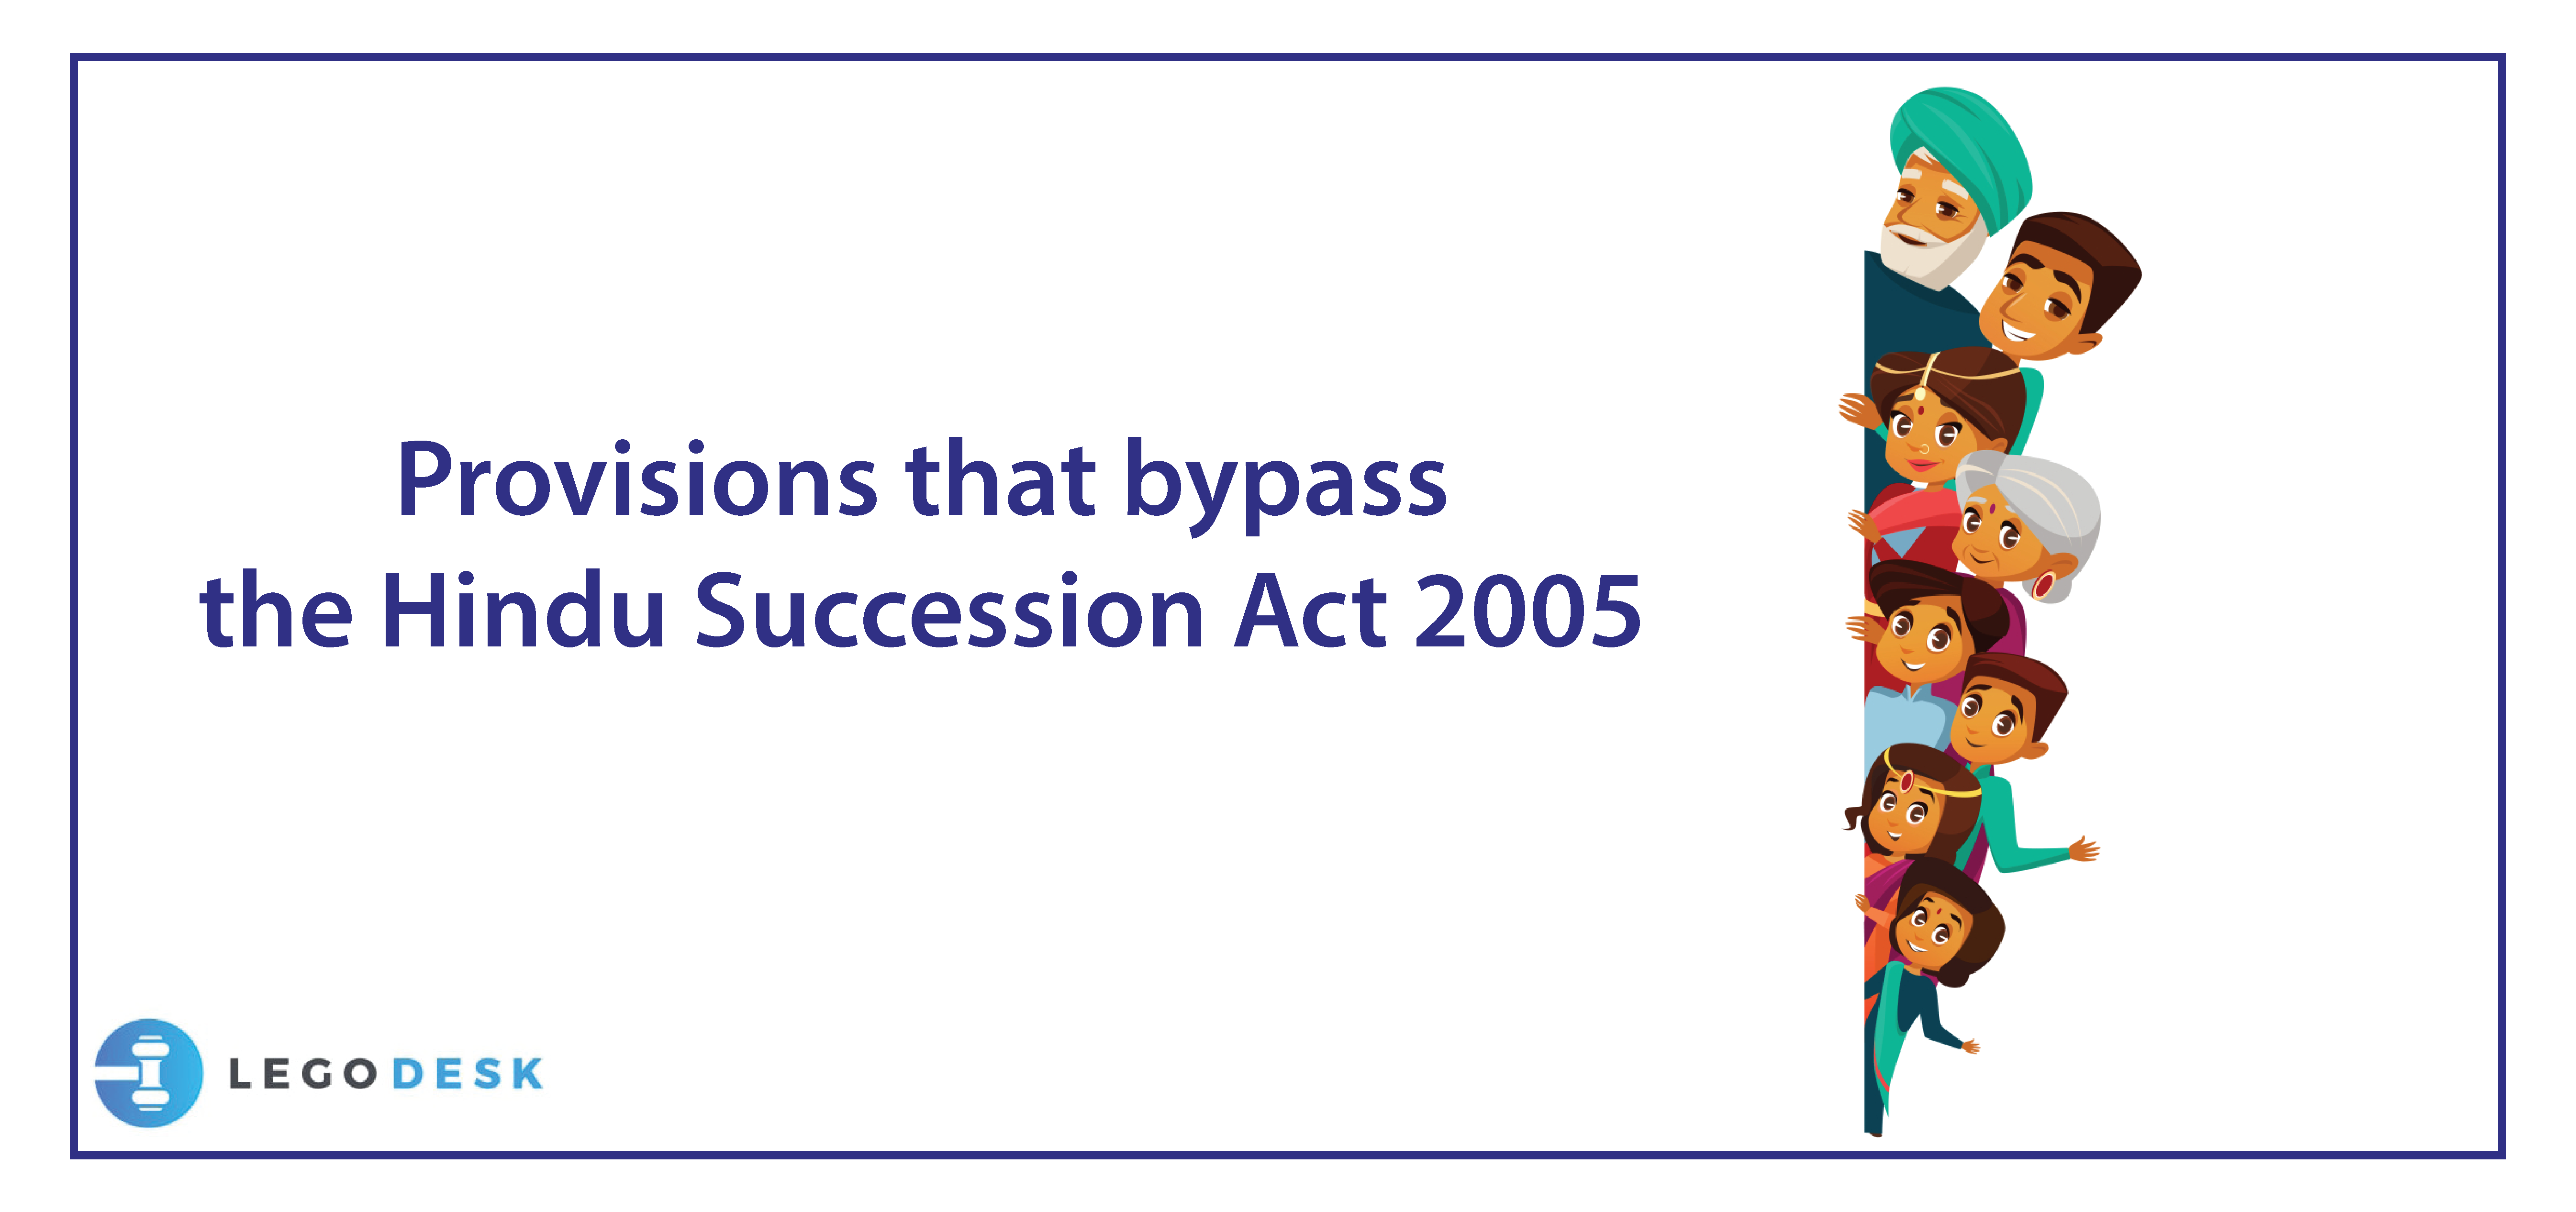 Provisions that bypass the Hindu Succession Act 2005